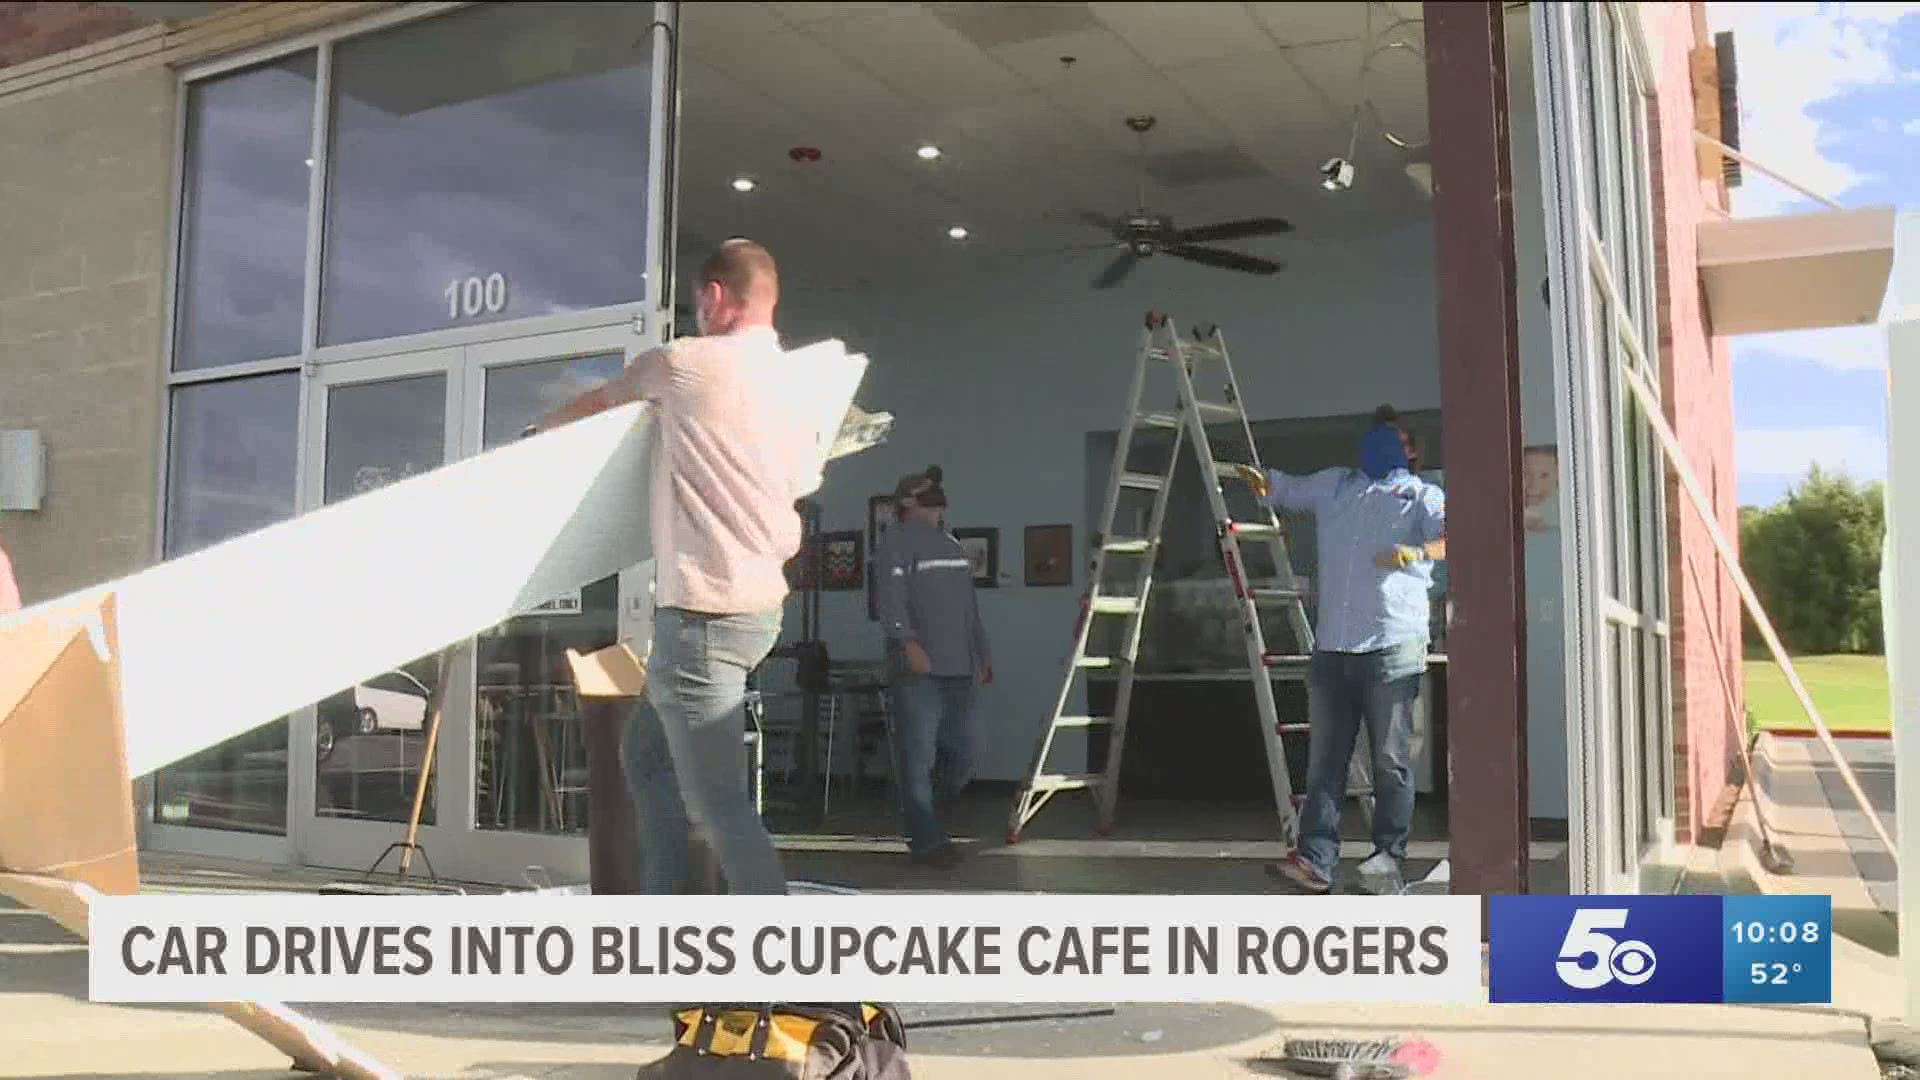 Despite the damage, Bliss Cupcake Cafe in Rogers says they will still be open to customers on Tuesday. https://bit.ly/33bdiS7